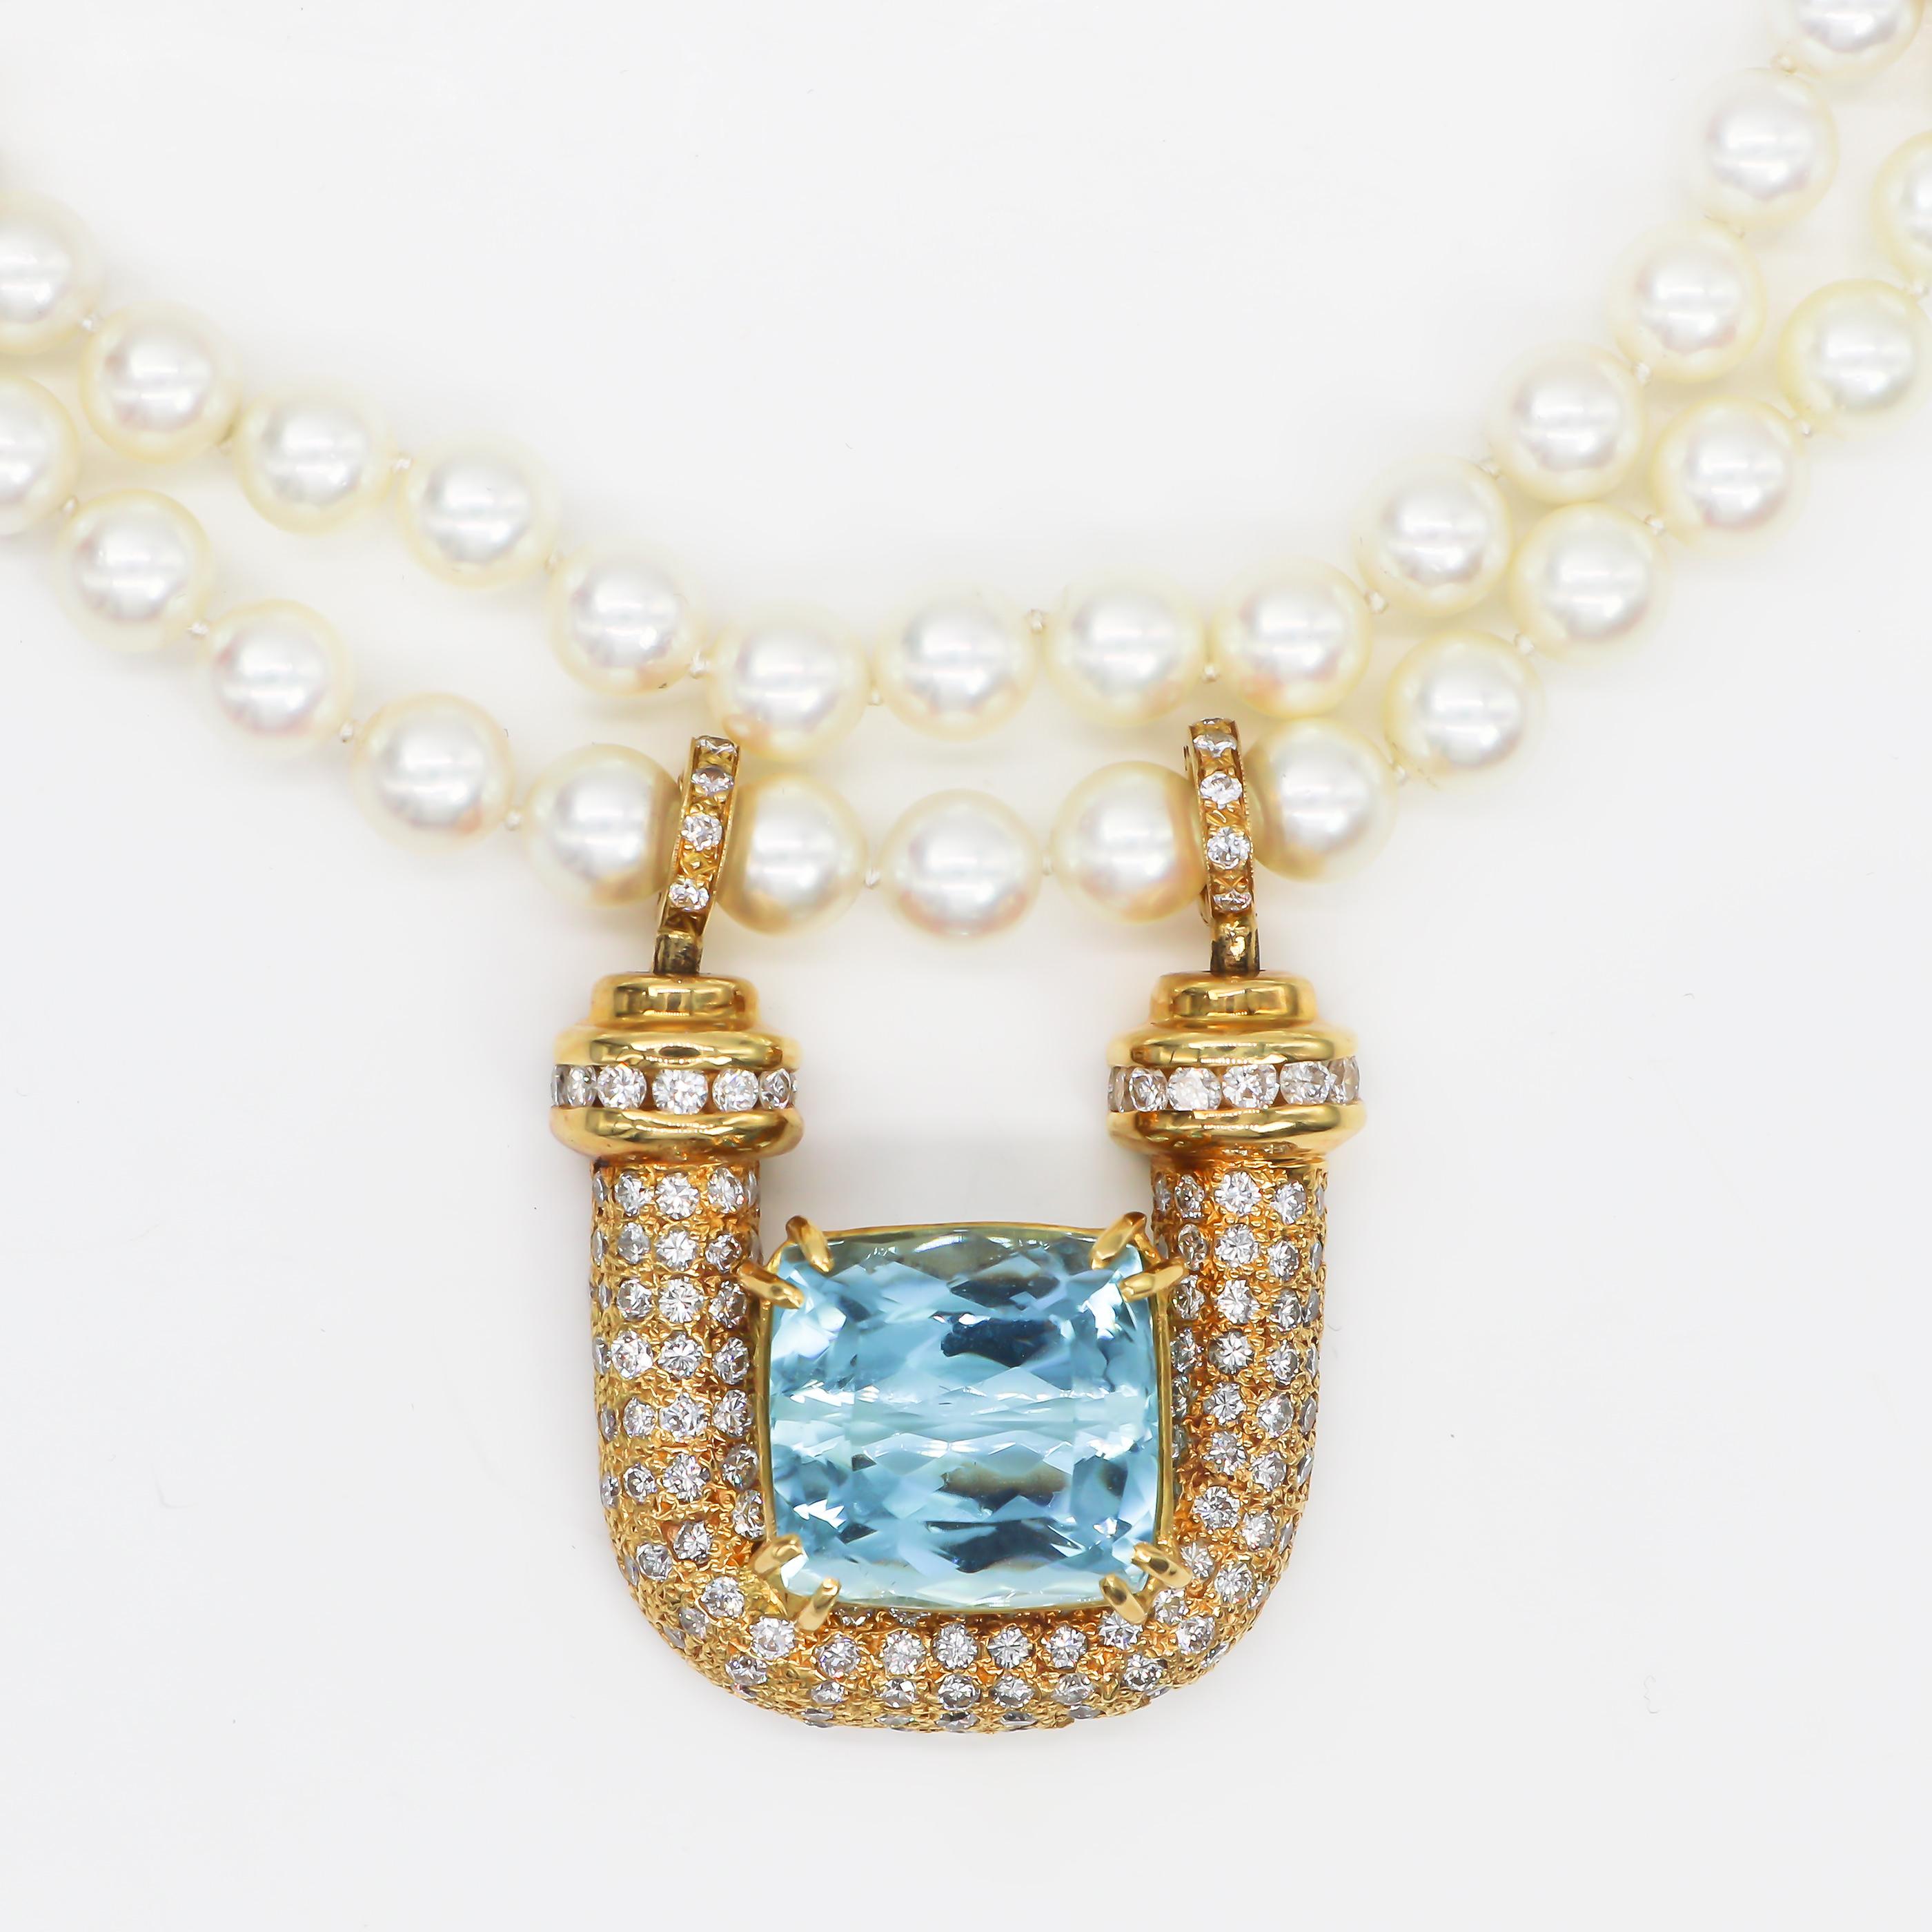 Aquamarine 20 Carat

Diamonds = 6 Carats
( Color: F-G, Clarity: VS )

Pearls = 6 milimeters

Metal: 18K Yellow Gold & 14K Yellow Gold

Jewelry Gift Box Included